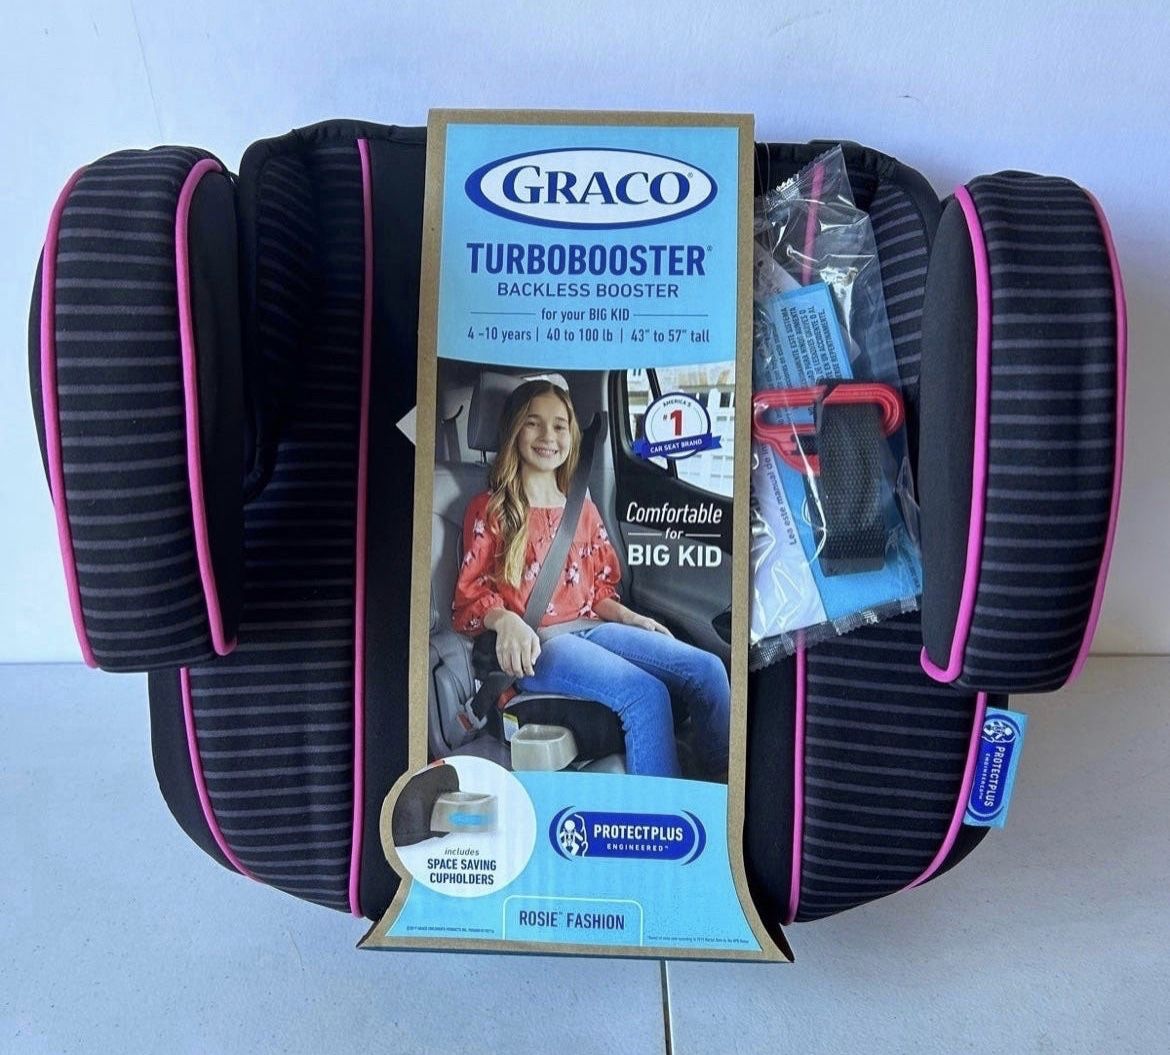 Graco TurboBooster Backless Booster Car Seat, Galaxy #4093